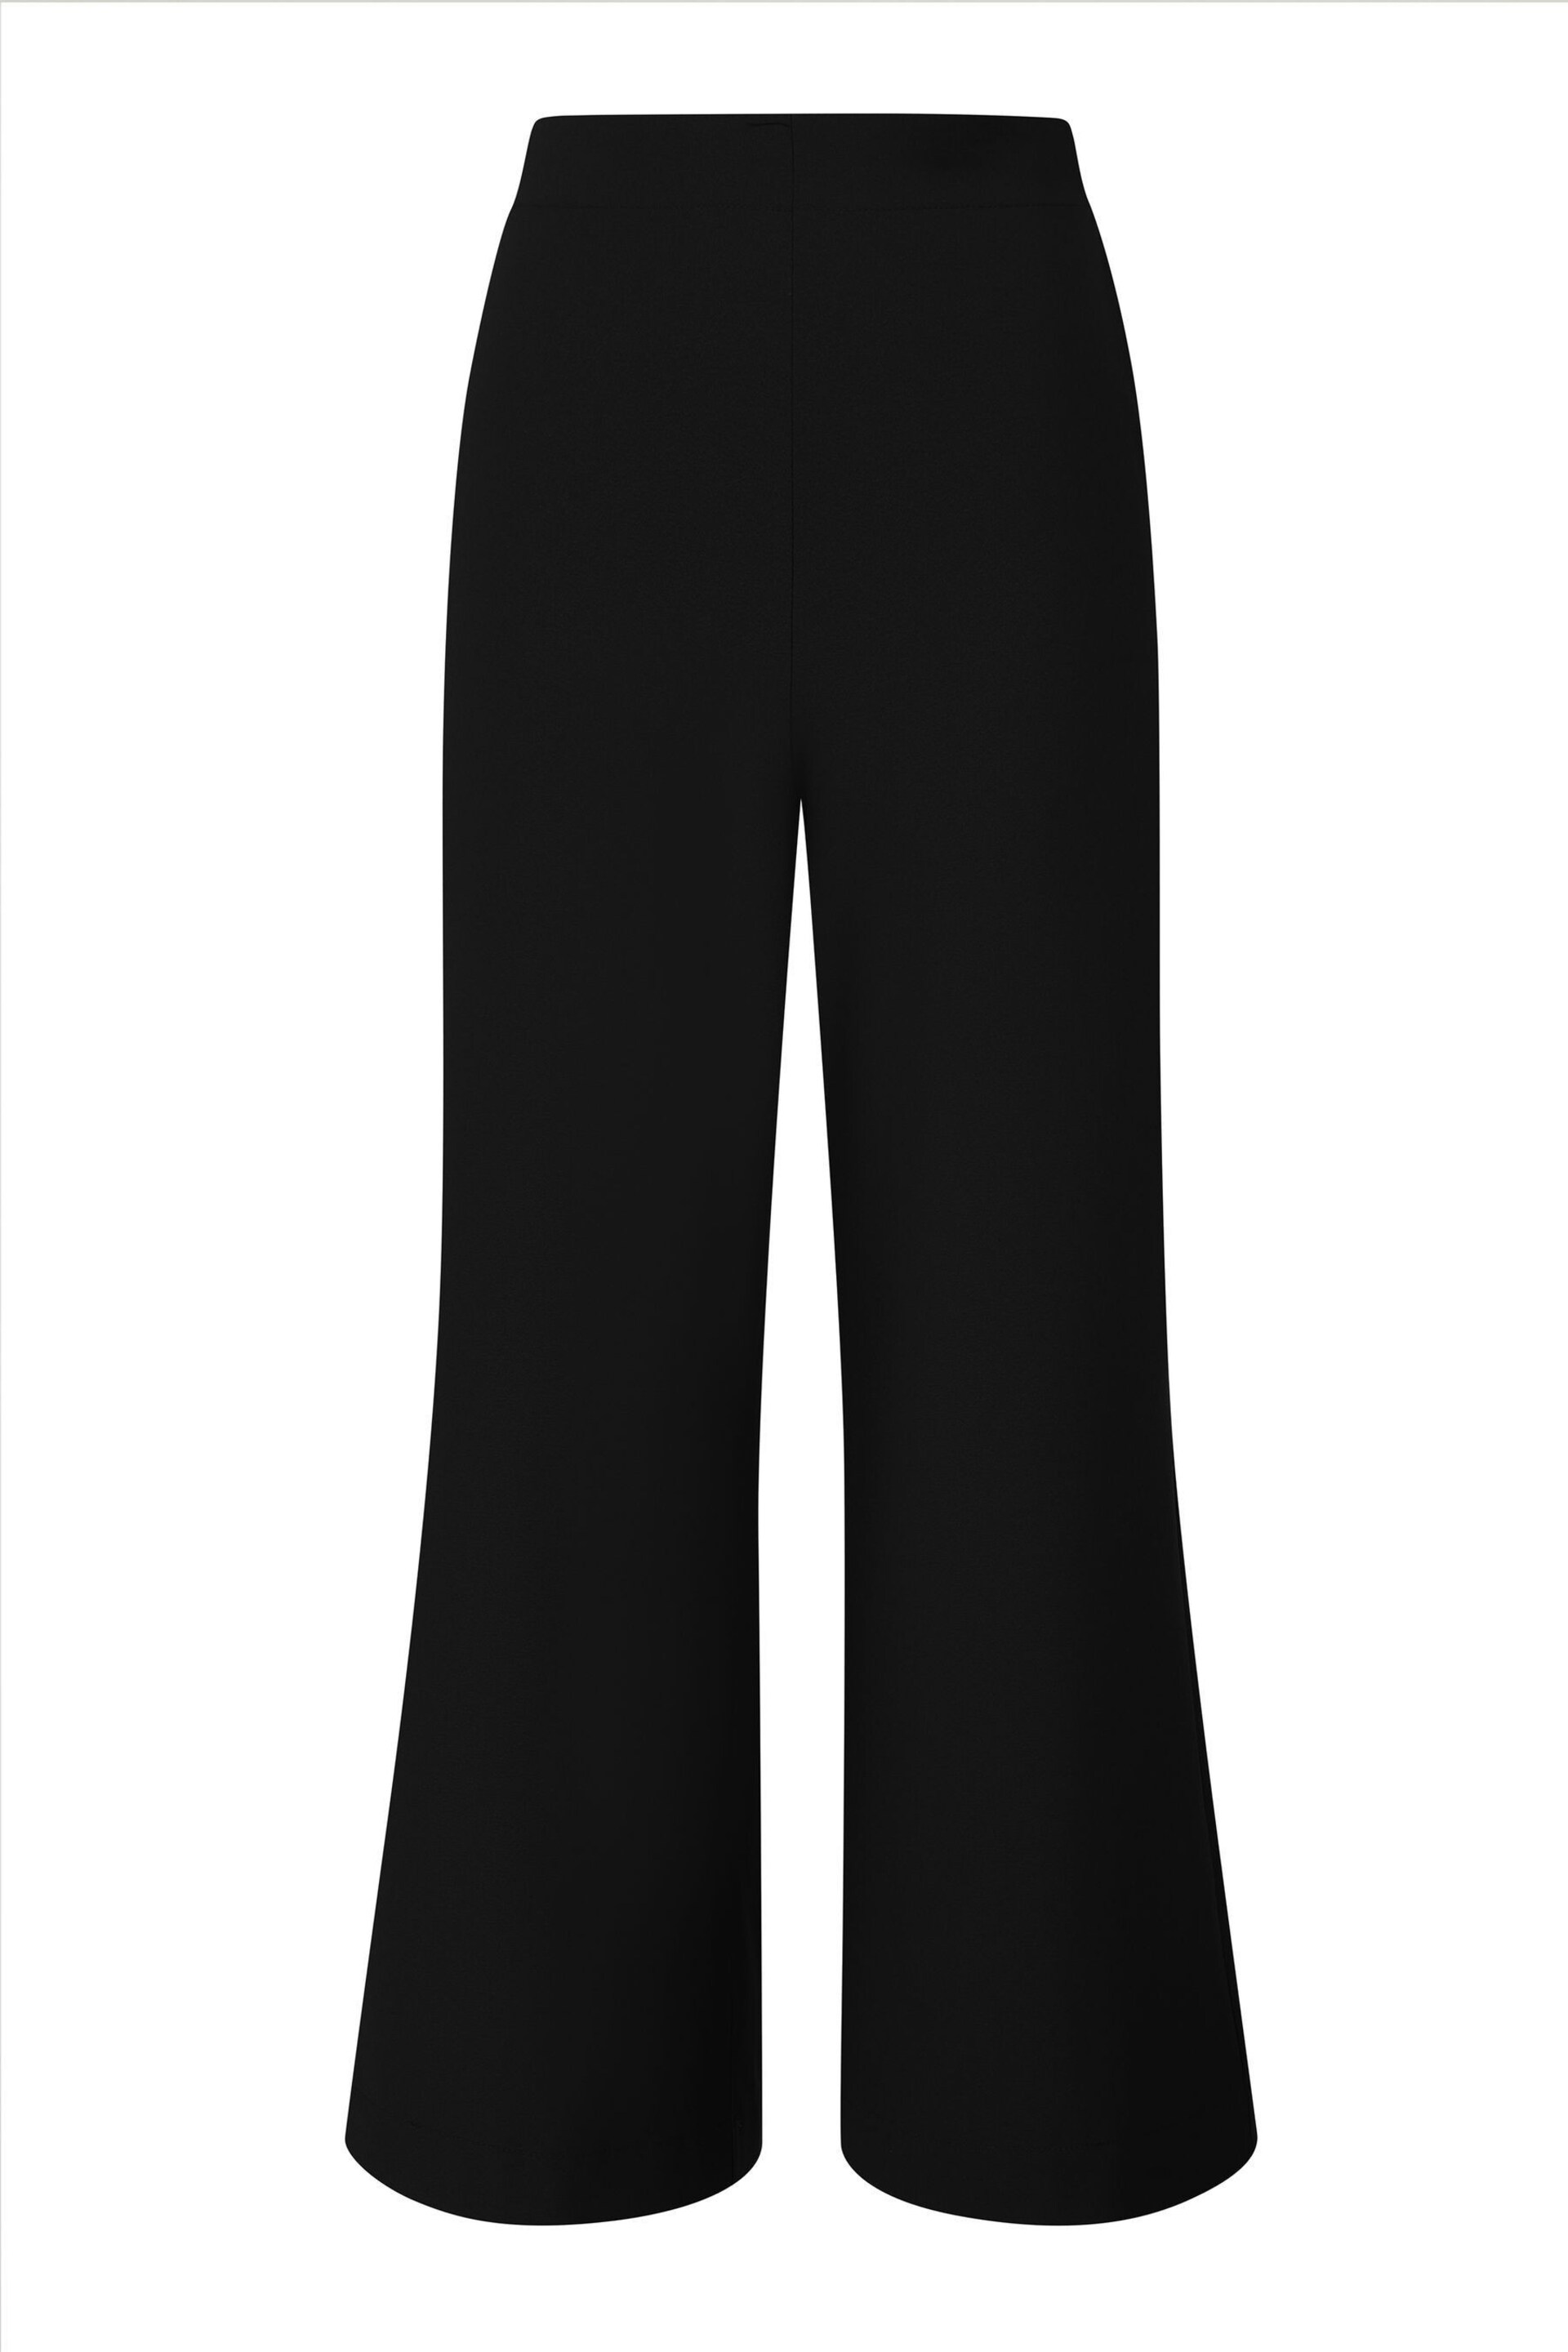 HotSquash Black Luxe-Lounge Wide Leg Crepe Trousers - Image 4 of 4